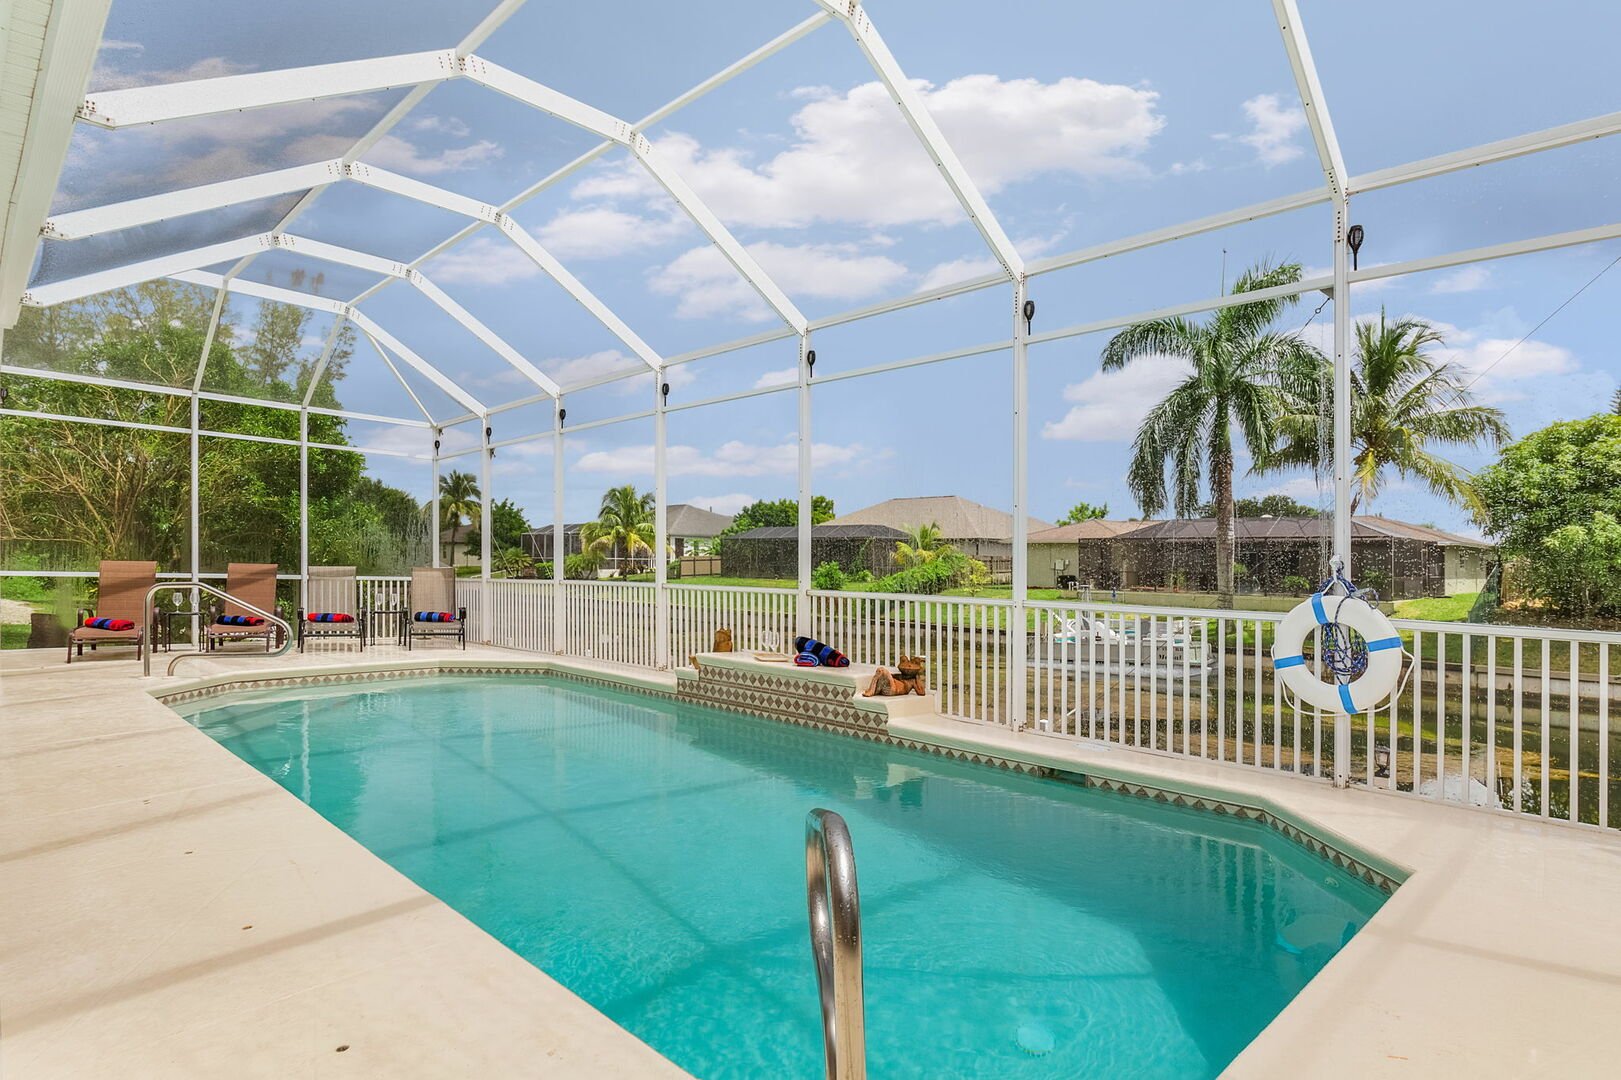 Heated pool vacation rental in Cape Coral, Florida